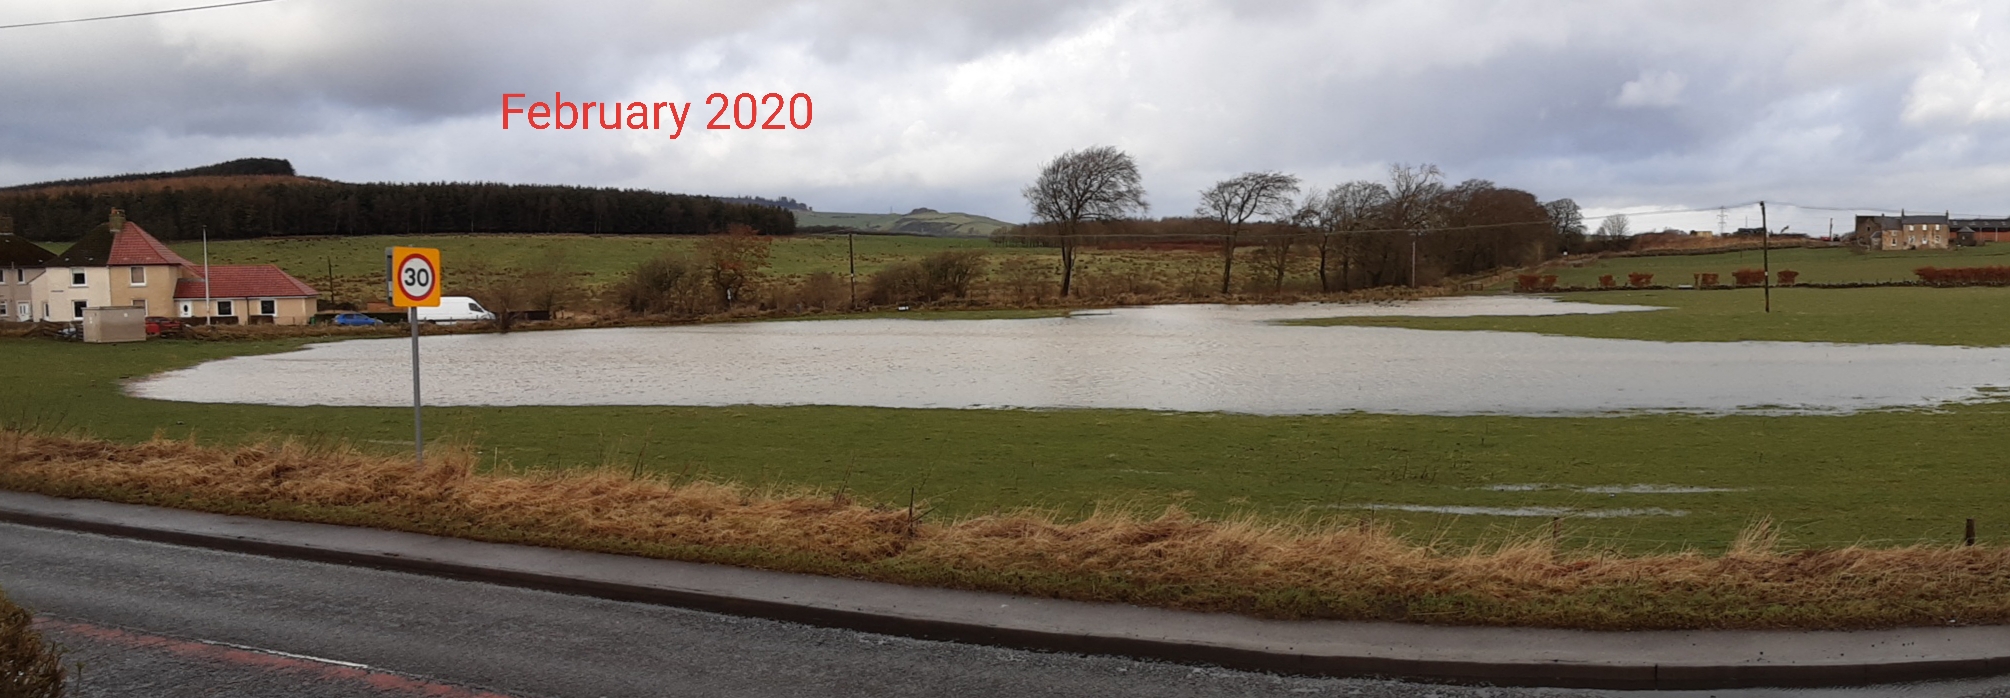 Objections to the development were raised concerning historic flooding of the site.